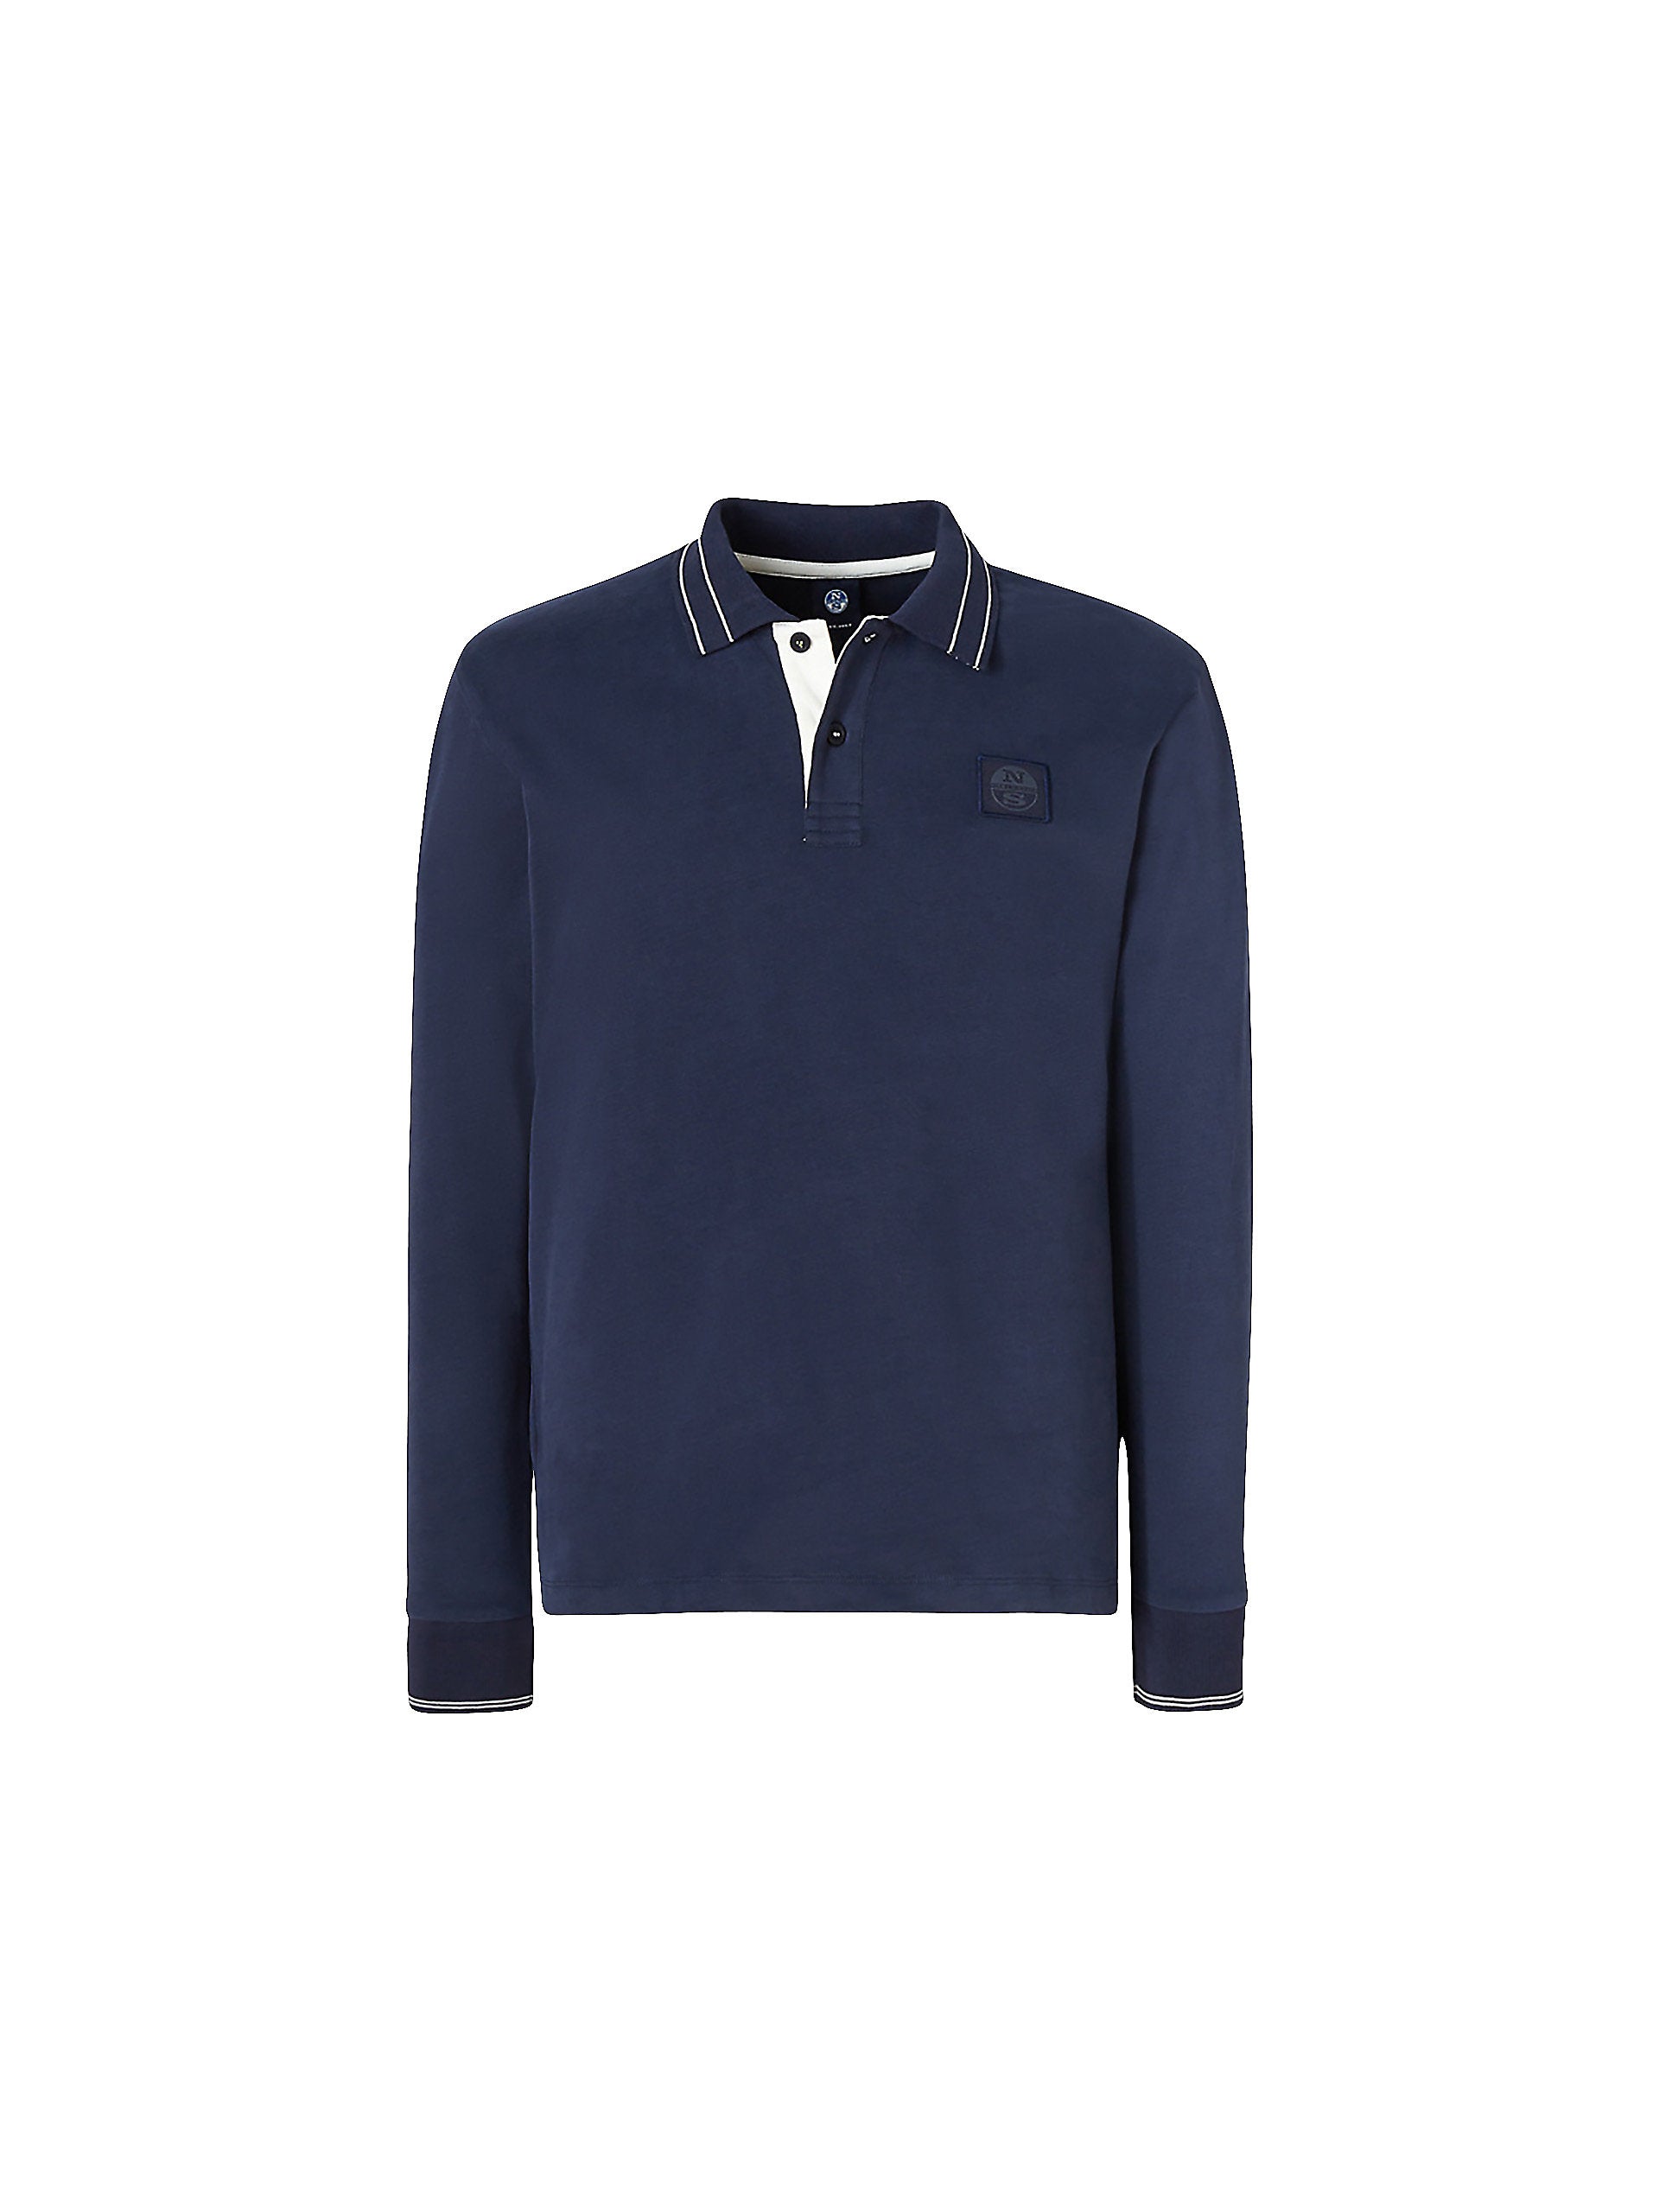 North Sails - Polo in jersey pesanteNorth SailsNavy blueS